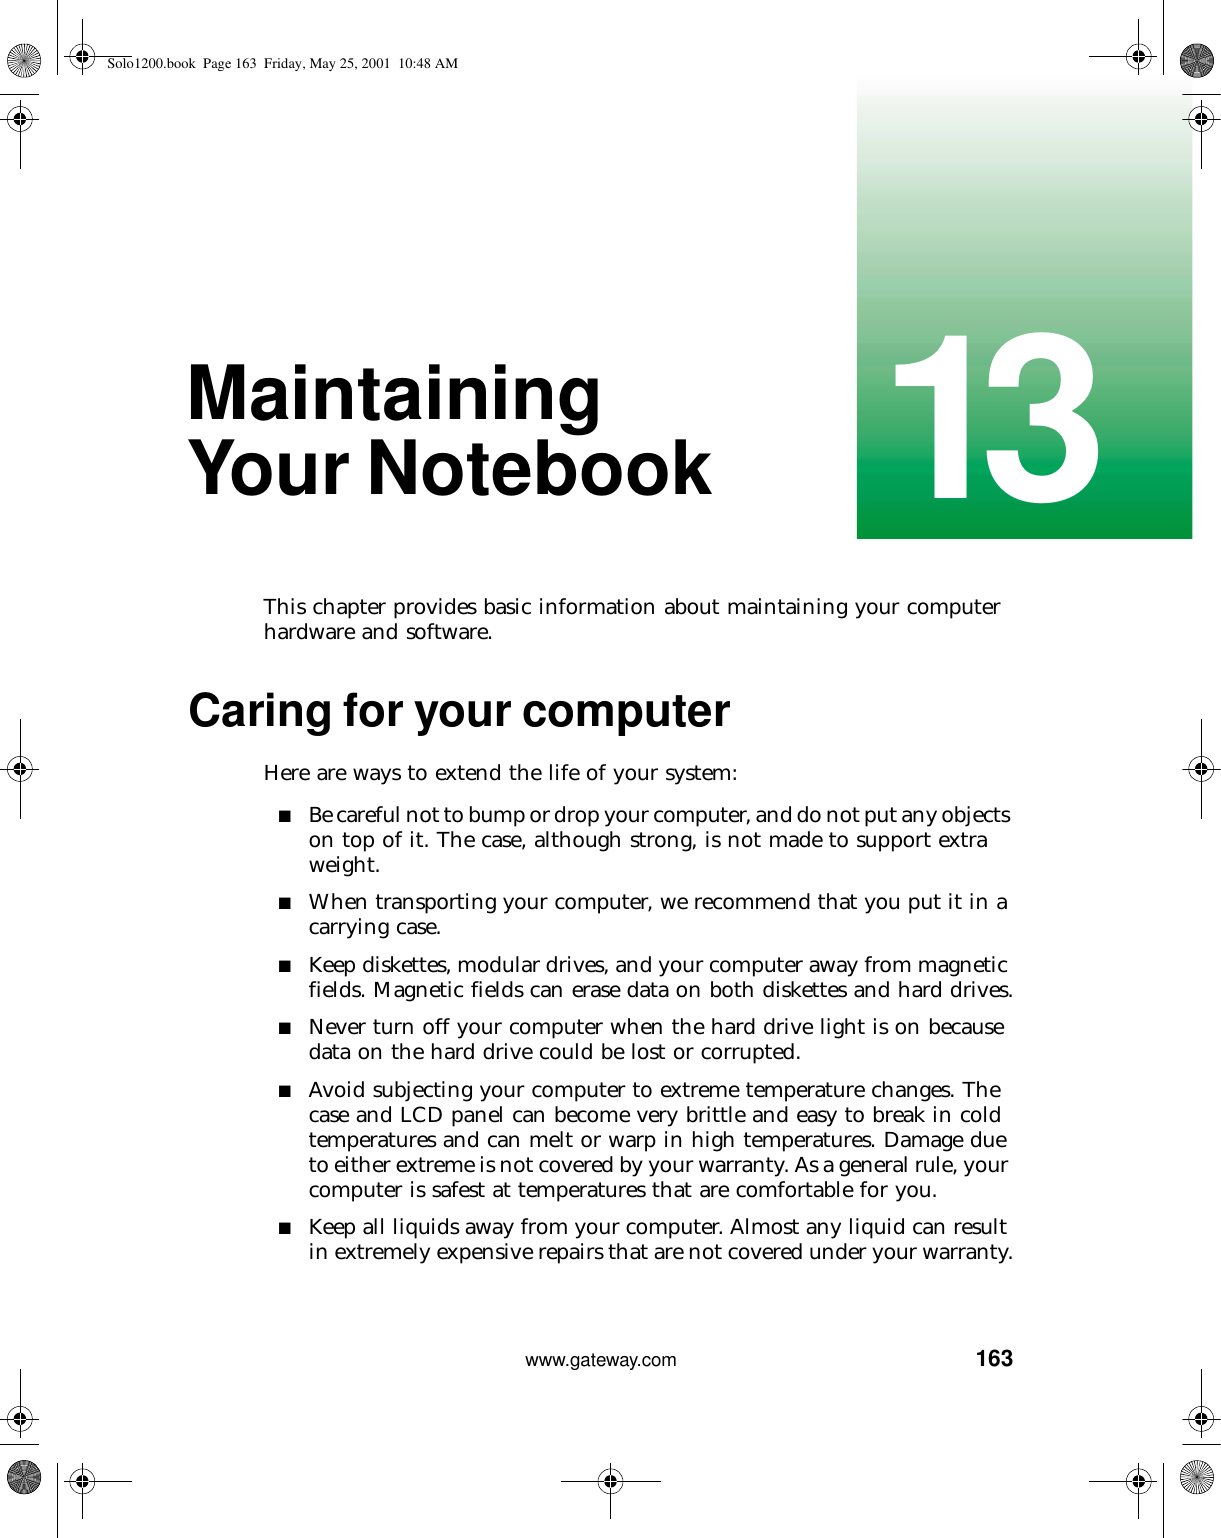 16313www.gateway.comMaintaining Your NotebookThis chapter provides basic information about maintaining your computer hardware and software.Caring for your computerHere are ways to extend the life of your system:■Be careful not to bump or drop your computer, and do not put any objects on top of it. The case, although strong, is not made to support extra weight.■When transporting your computer, we recommend that you put it in a carrying case.■Keep diskettes, modular drives, and your computer away from magnetic fields. Magnetic fields can erase data on both diskettes and hard drives.■Never turn off your computer when the hard drive light is on because data on the hard drive could be lost or corrupted.■Avoid subjecting your computer to extreme temperature changes. The case and LCD panel can become very brittle and easy to break in cold temperatures and can melt or warp in high temperatures. Damage due to either extreme is not covered by your warranty. As a general rule, your computer is safest at temperatures that are comfortable for you.■Keep all liquids away from your computer. Almost any liquid can result in extremely expensive repairs that are not covered under your warranty.Solo1200.book Page 163 Friday, May 25, 2001 10:48 AM